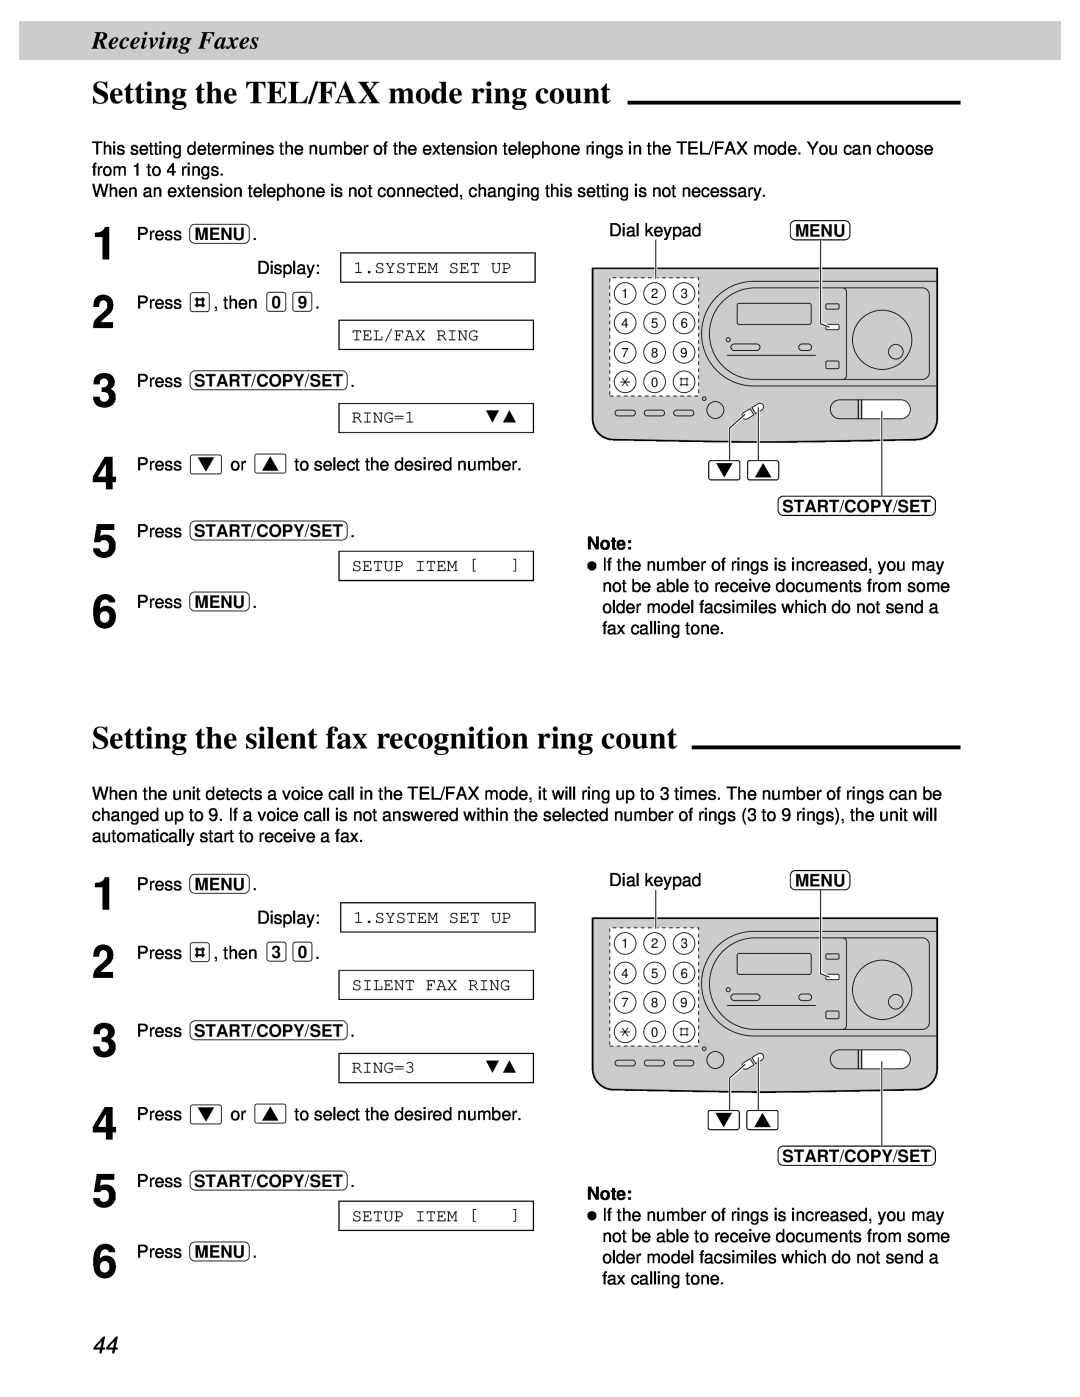 Panasonic KX-FT31BX Setting the TEL/FAX mode ring count, Setting the silent fax recognition ring count, Receiving Faxes 